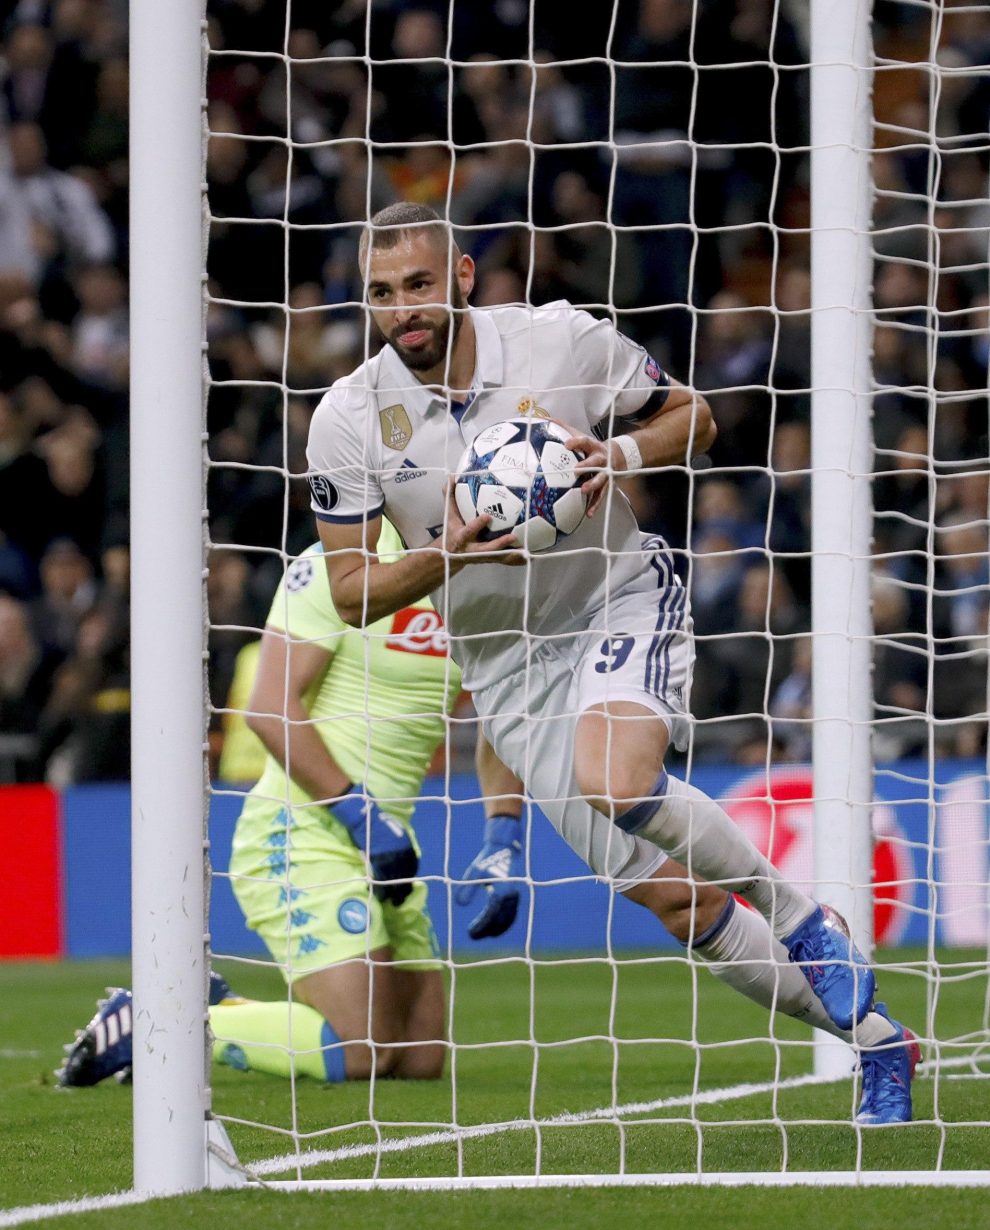 Real Madrid’s French striker Karim Benzema jubilates a goal, the first against Napoli, during their UEFA Champions League round of 16 match at Santiago Bernabeu stadium in Madrid, Spain, 15 February 2017. EFE/JuanJo Martin